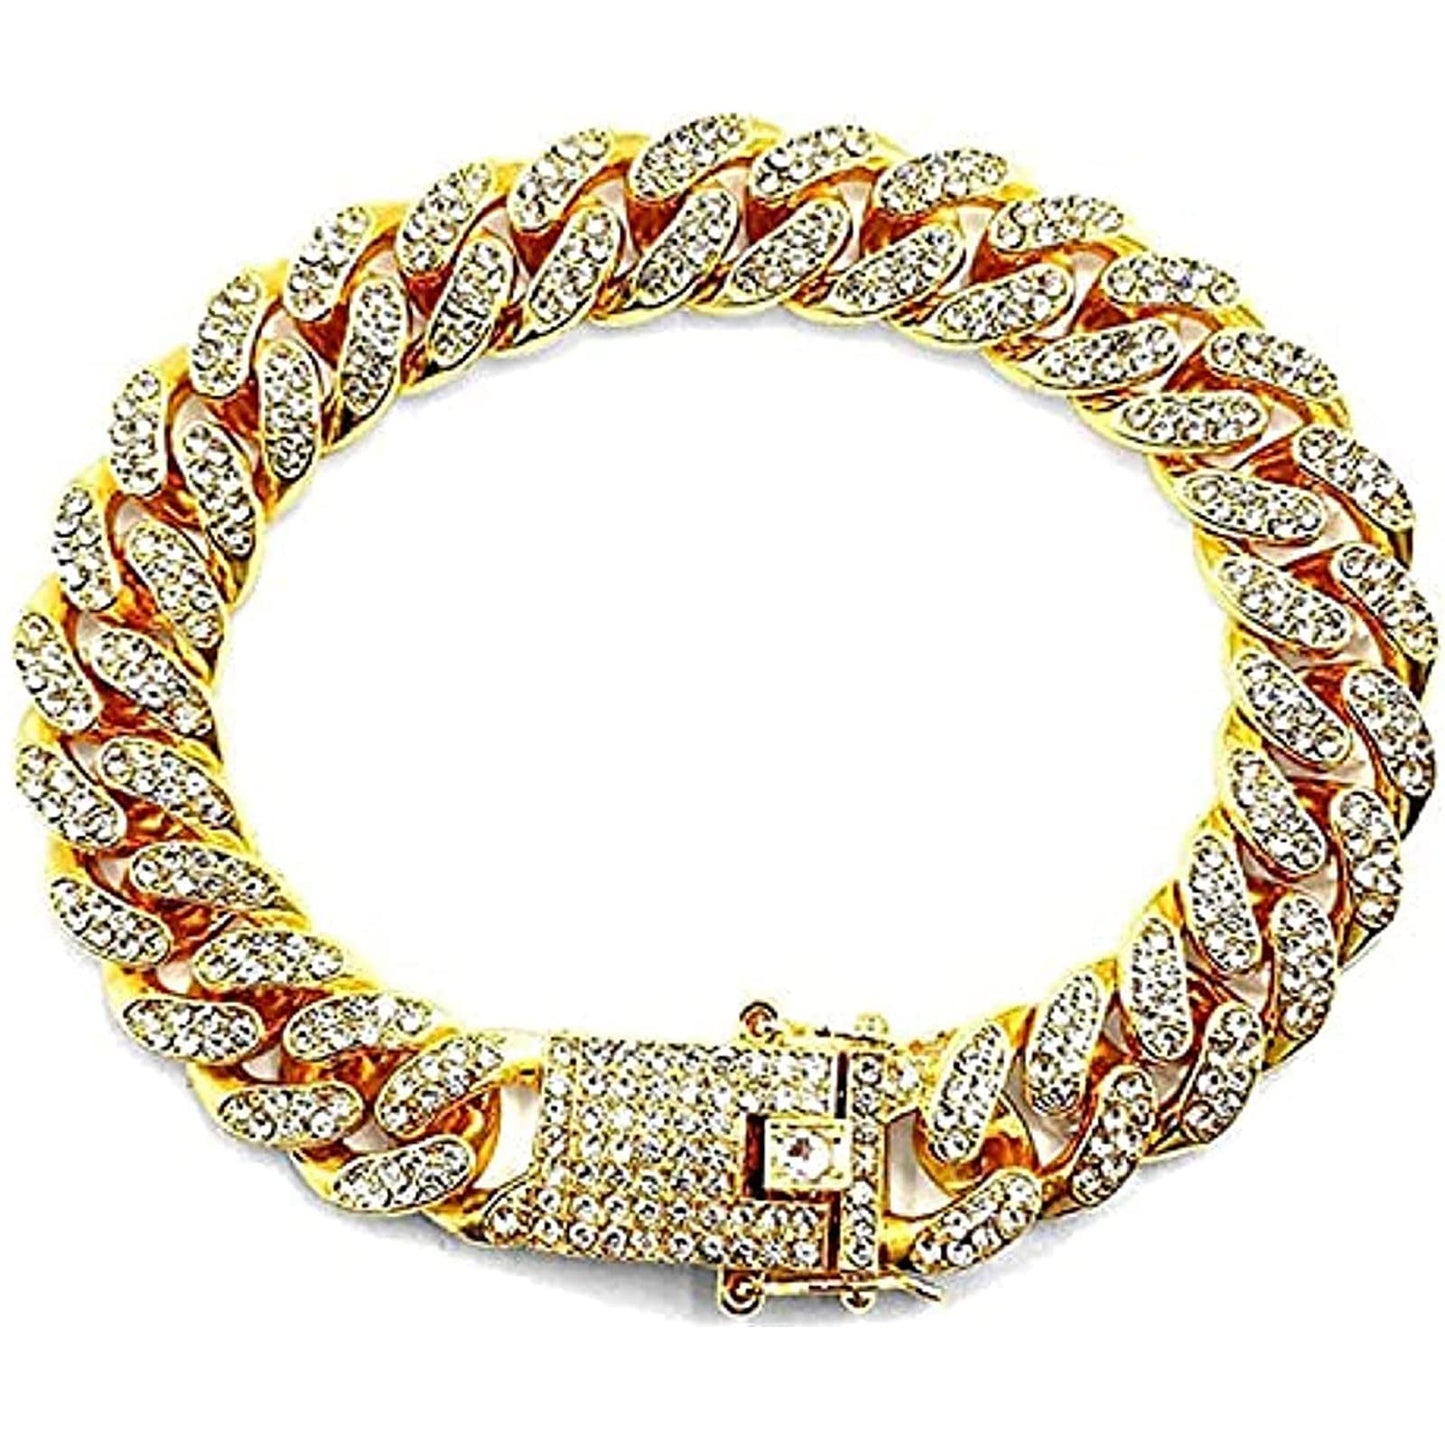 Apzzic Cuban Link Bracelet Iced Out Miami Gold Plated Hip Hop Full CZ Prong Diamond Bracelet with Giftbox for Men Women